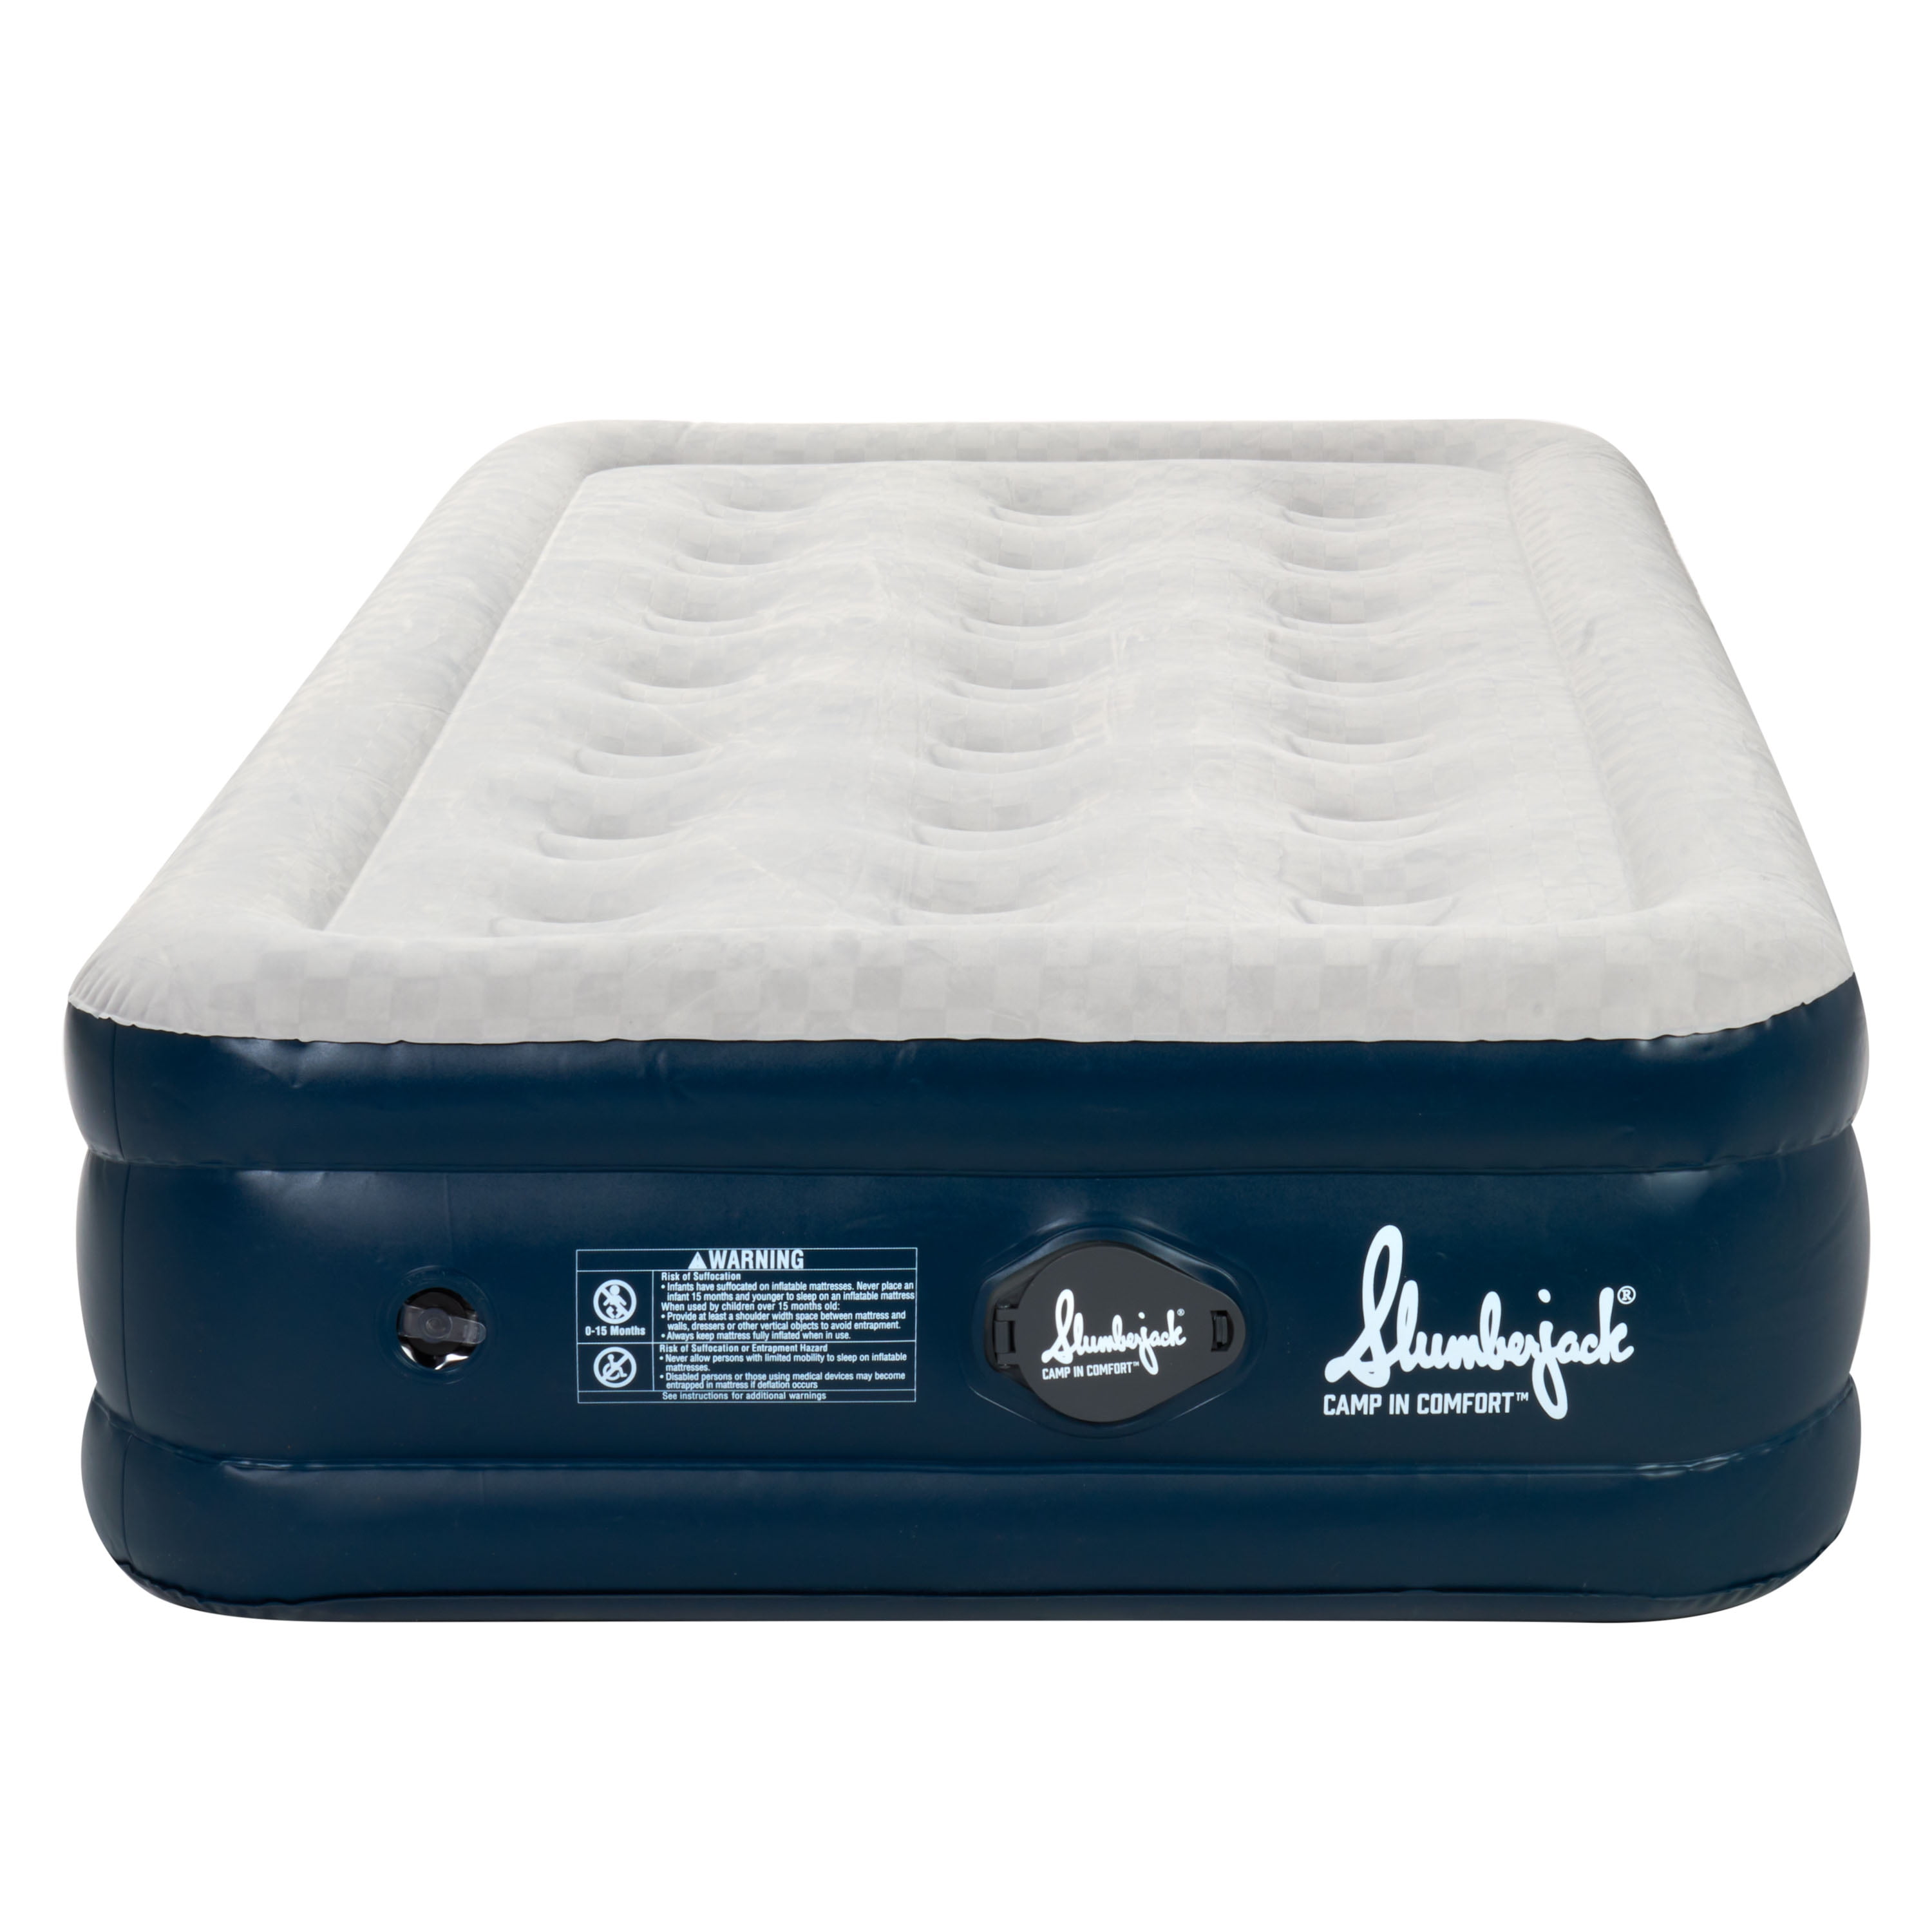 Slumberjack Grand Mesa 15” Airbed Mattress, with Built-In Removable Pump, Twin